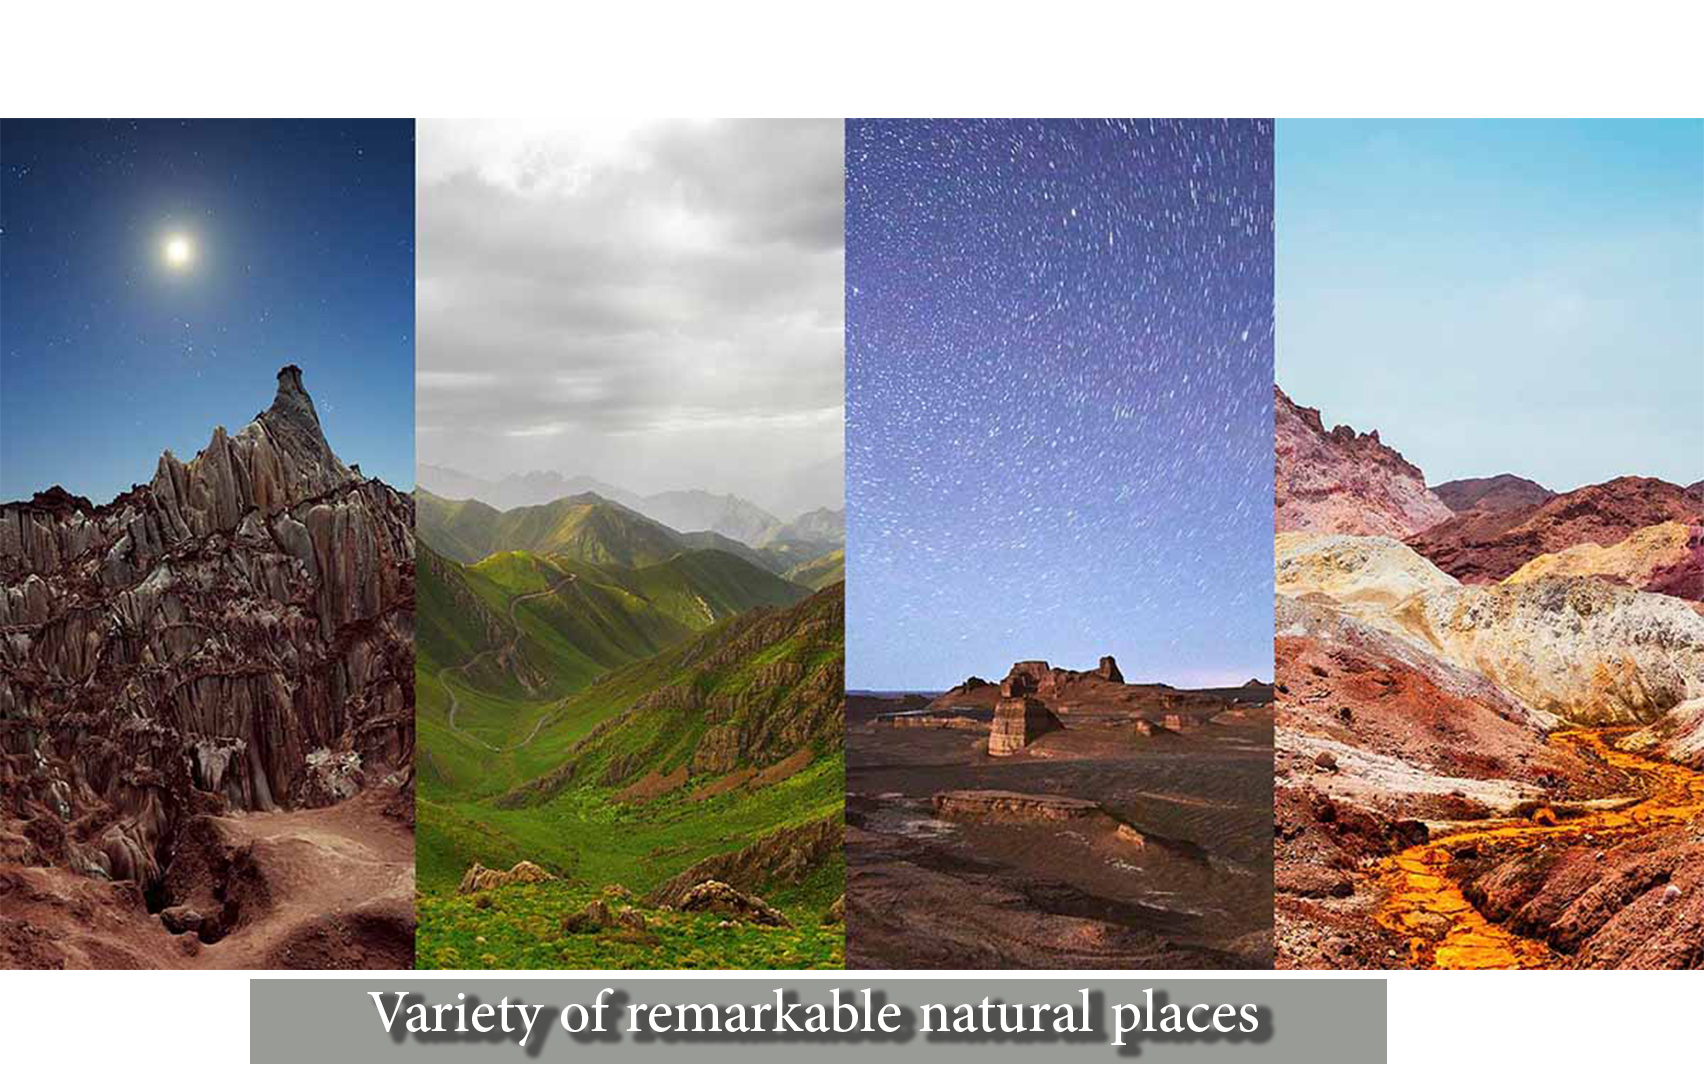 travel to Iran for: Variety of remarkable natural places